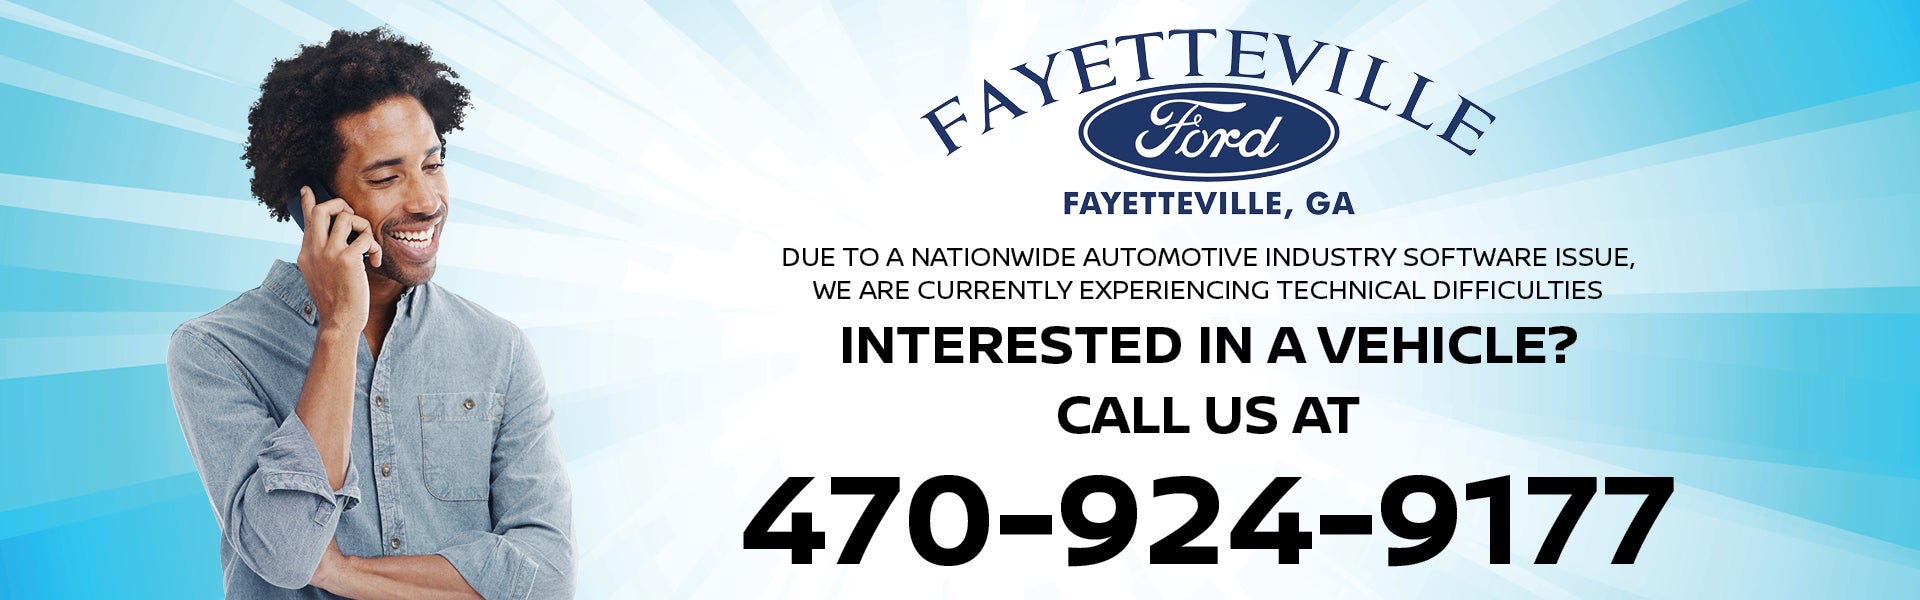 interested in a vehicle? Call us